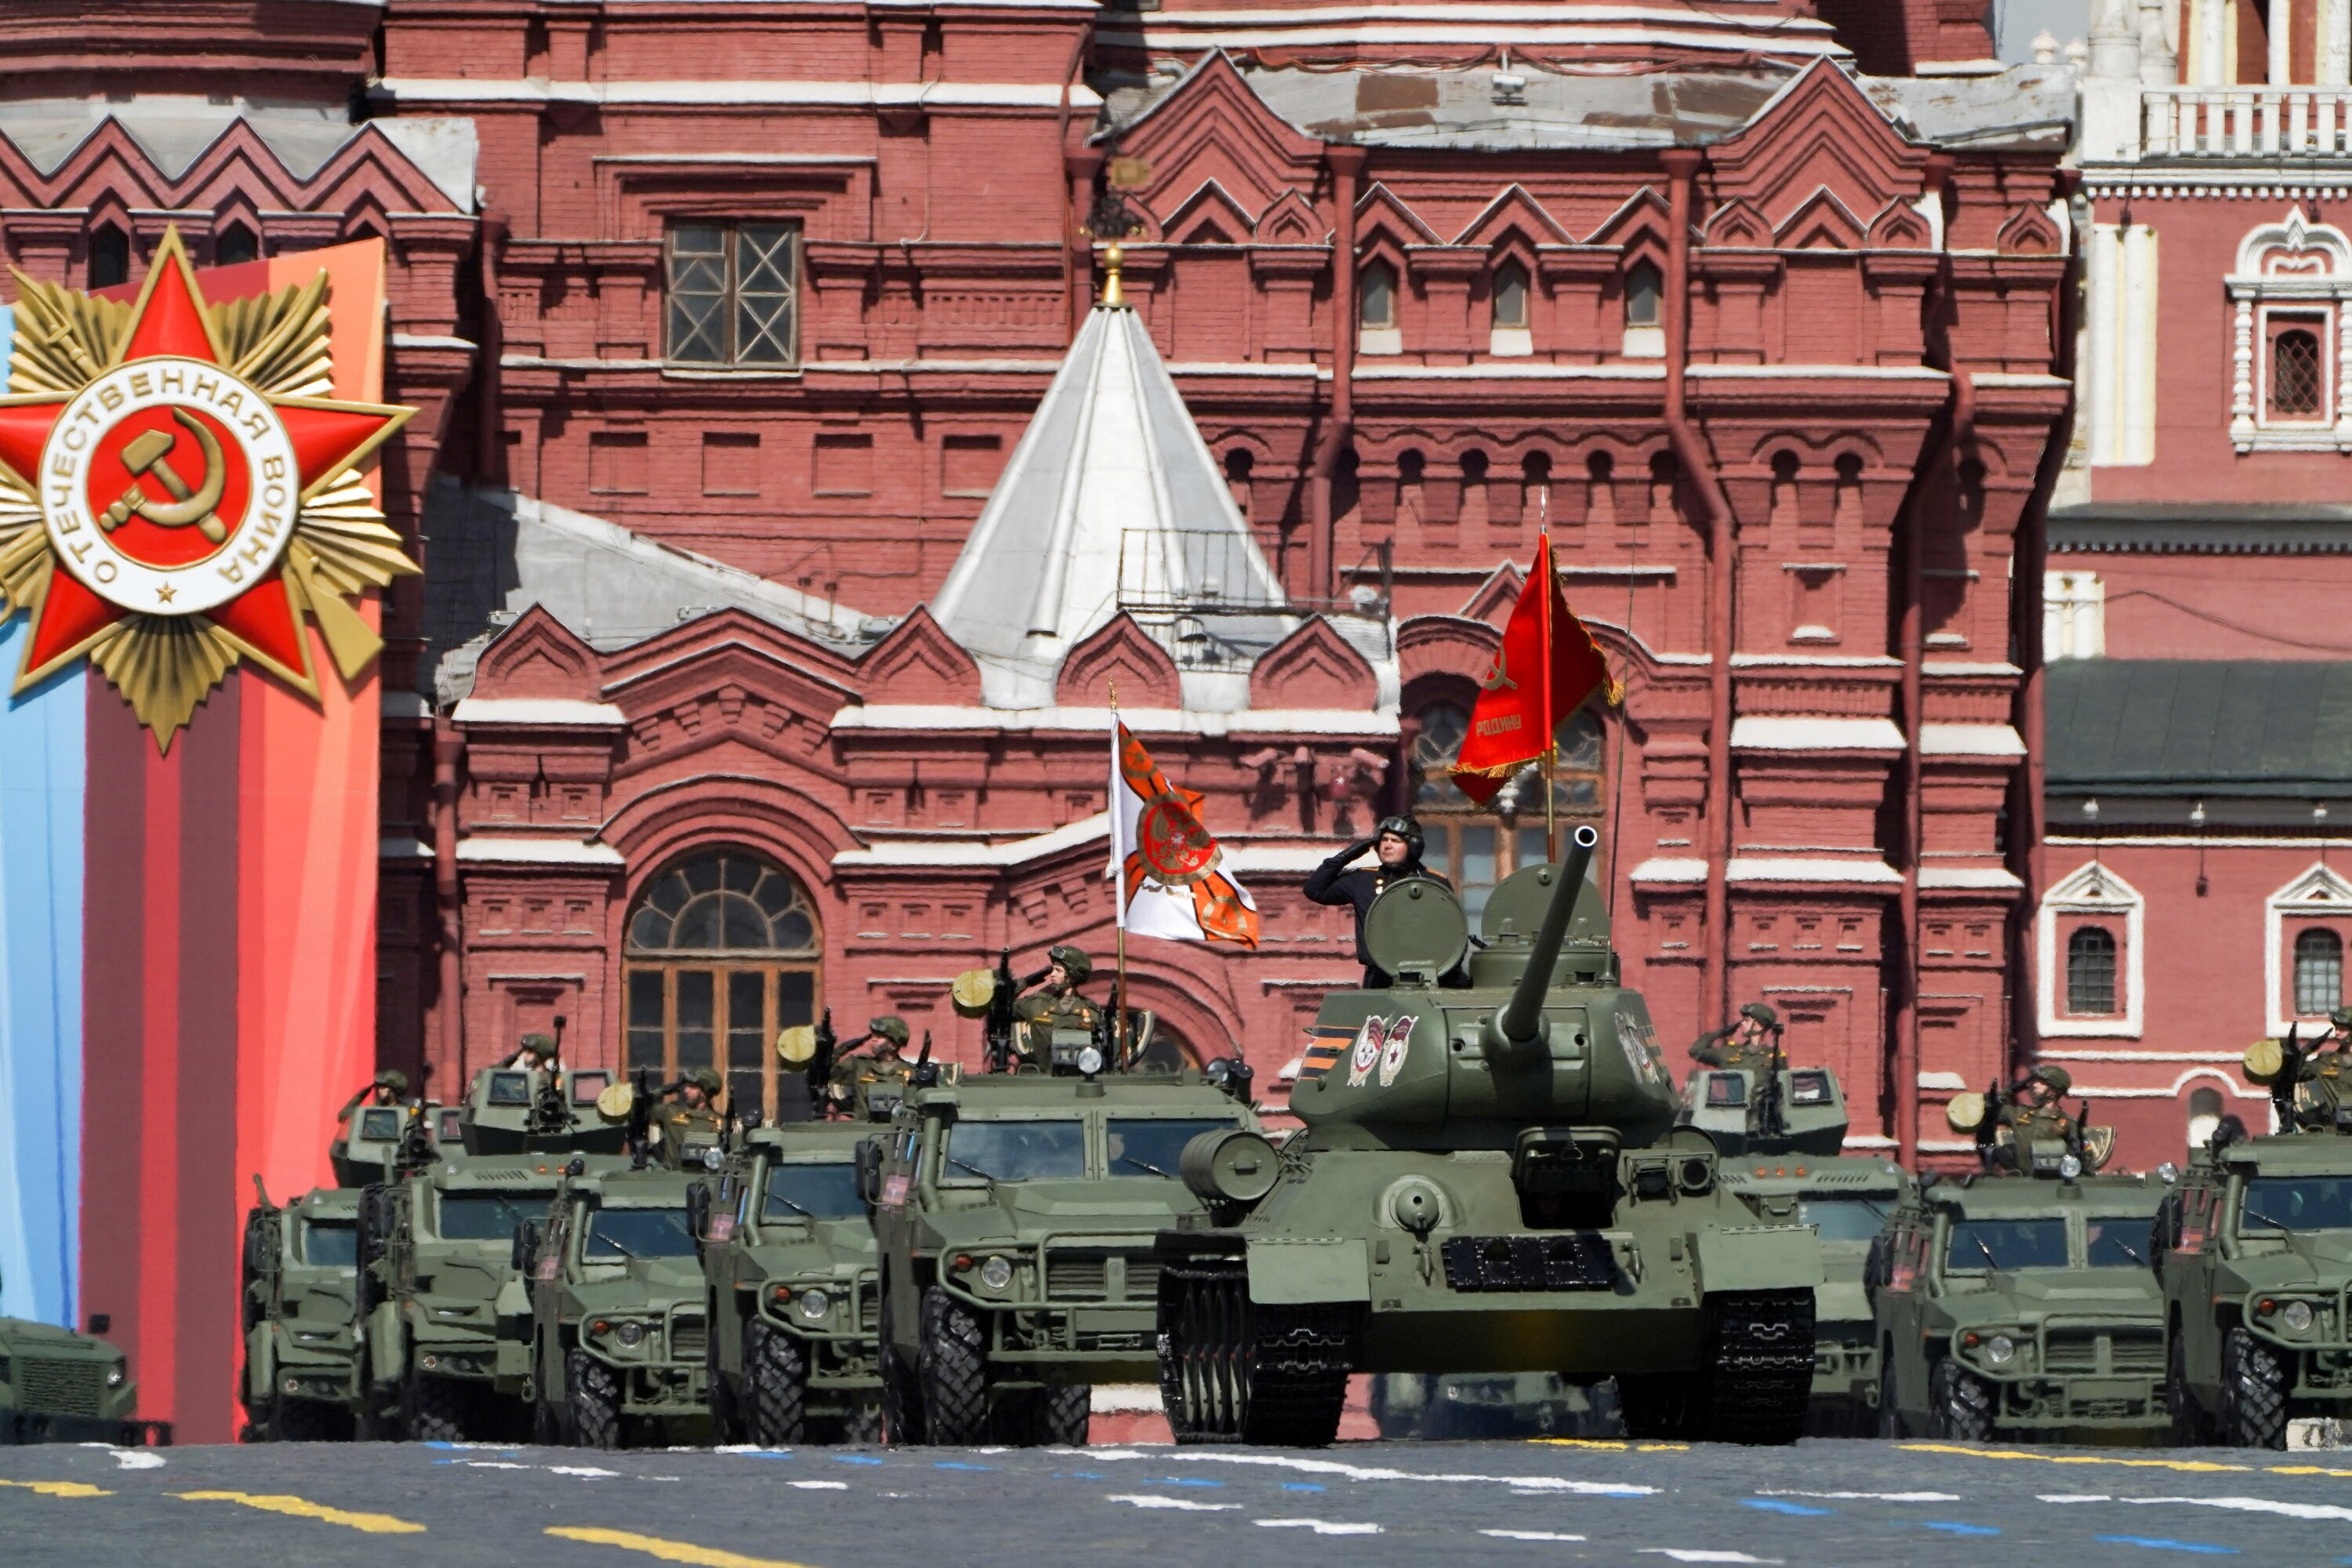 Why does Russia celebrate Victory Day on May 9, and what does it mean